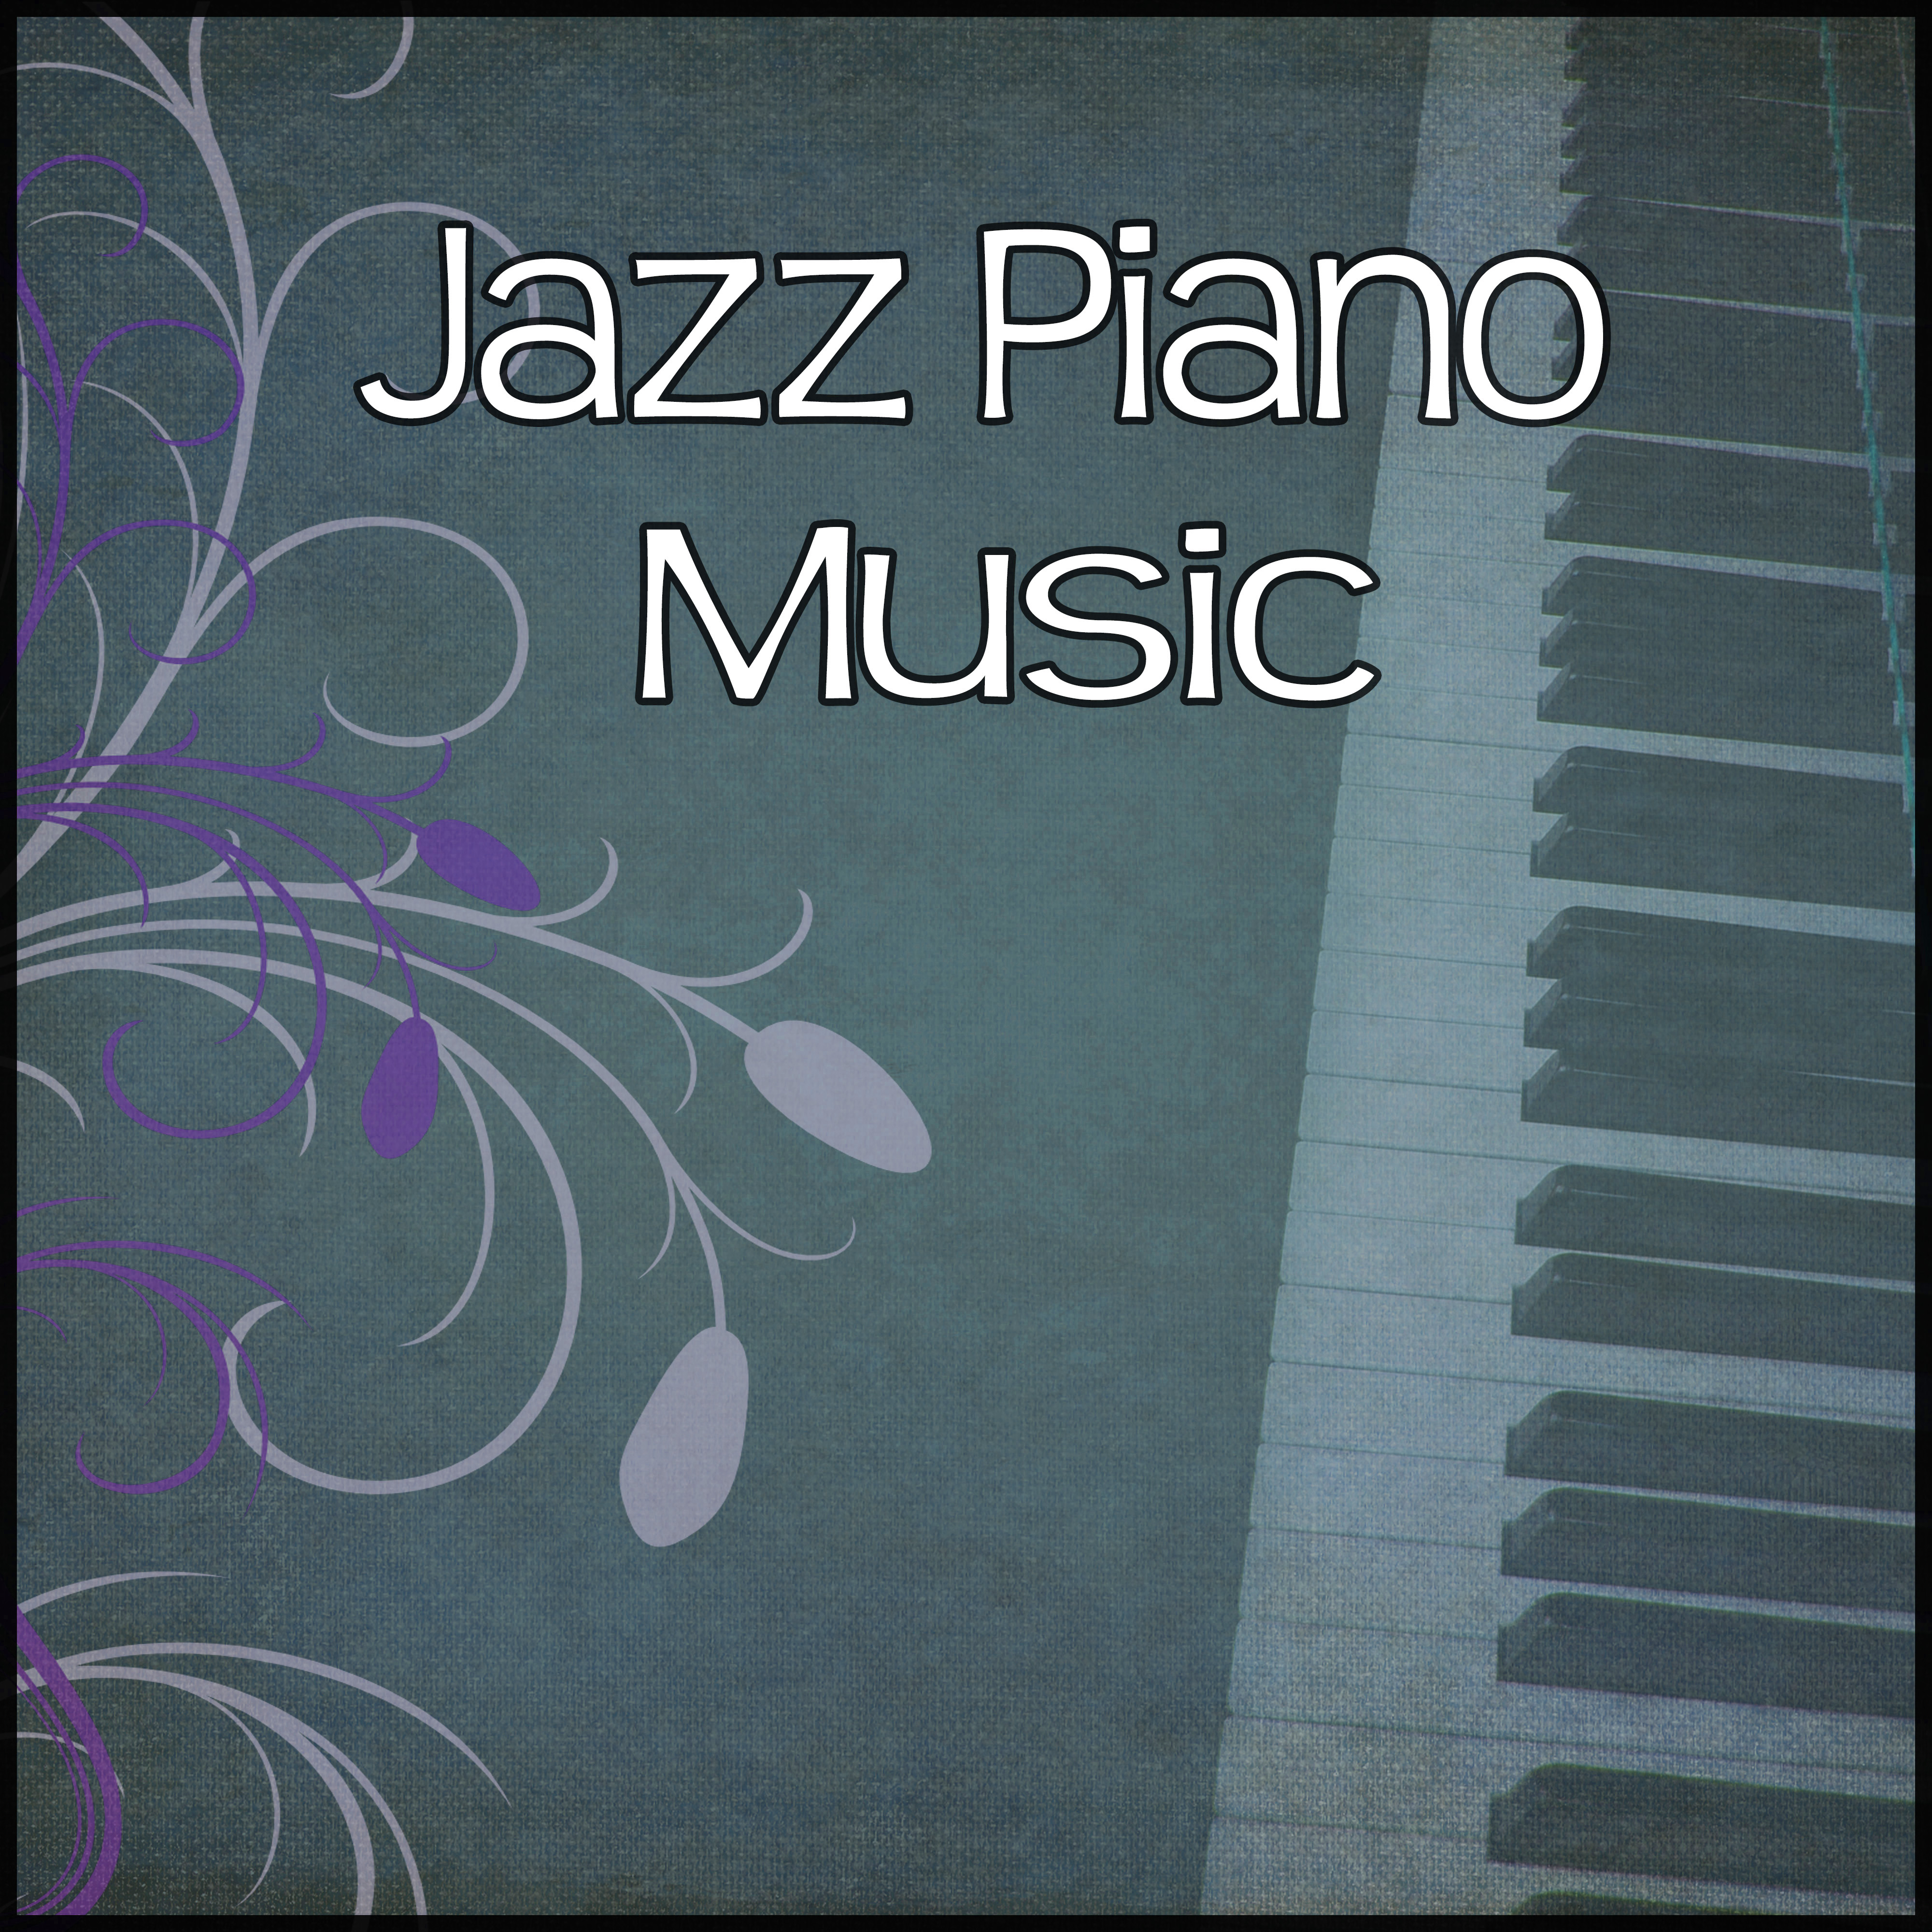 Jazz Piano Music – Most Relaxing Piano Jazz, Background Music for Bar and Restaurant, Jazz Piano Sounds, Relaxing Coffee